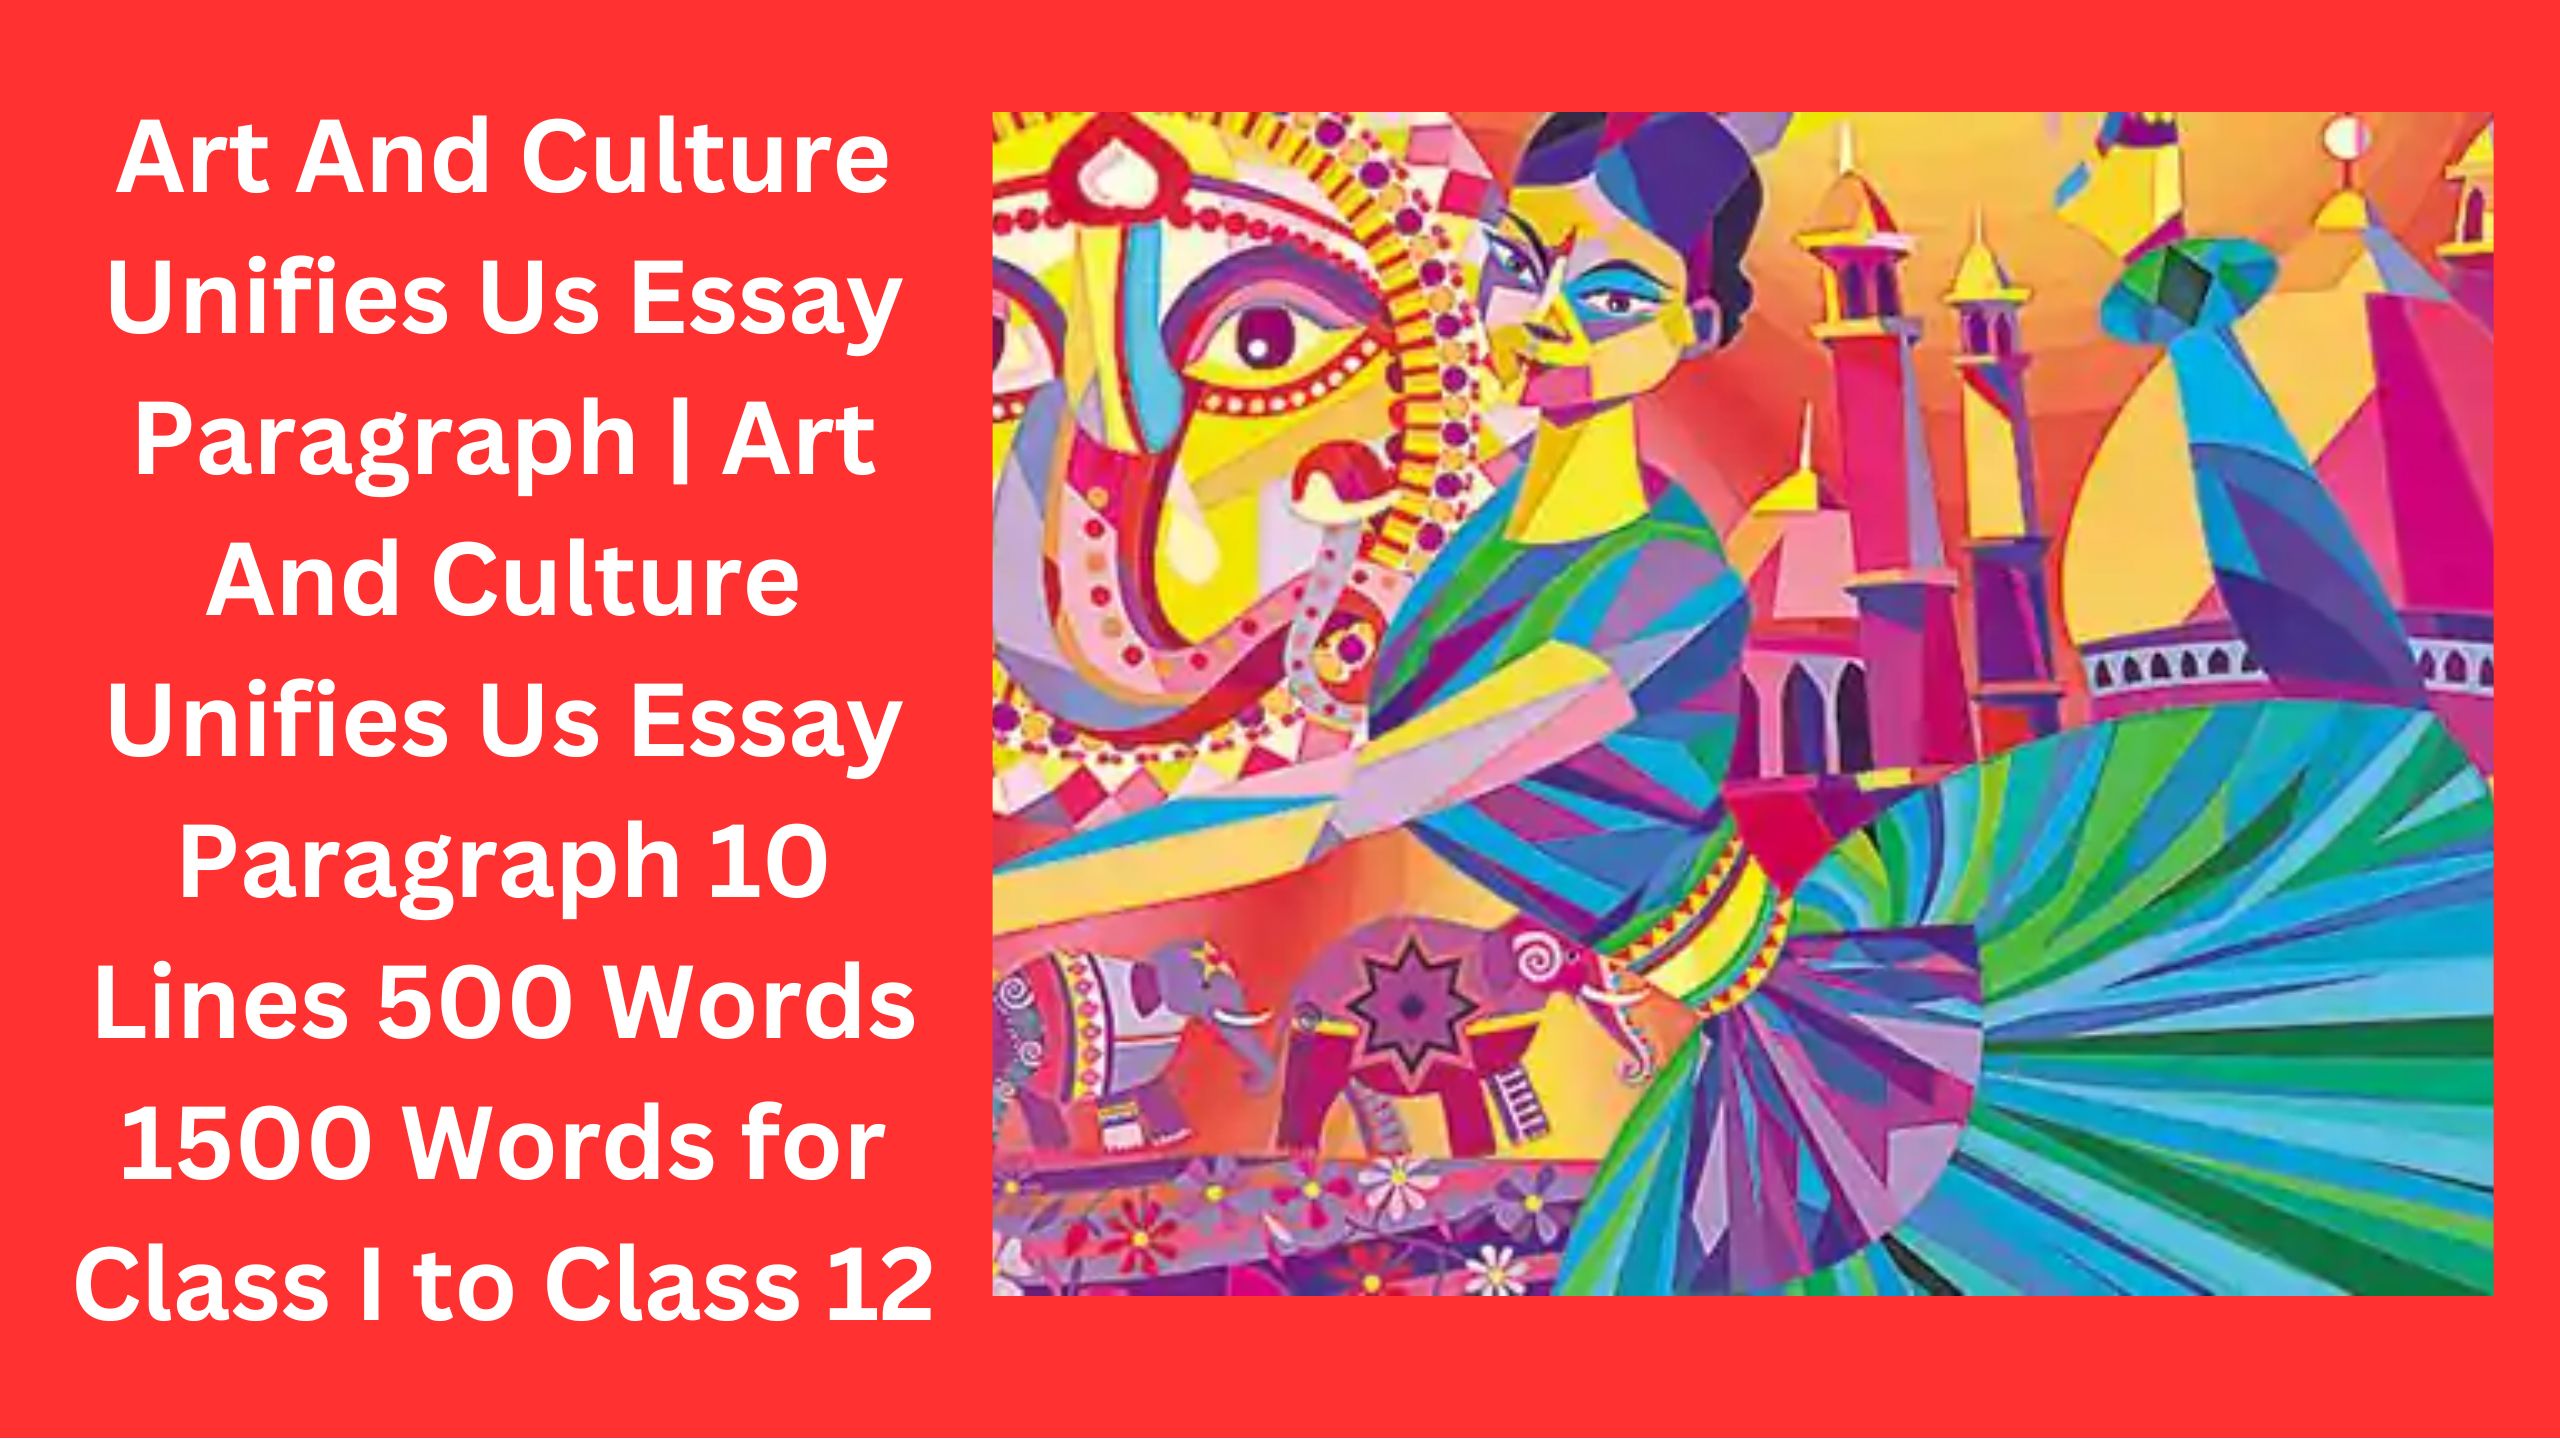 Art And Culture Unifies Us Essay Paragraph | Art And Culture Unifies Us Essay Paragraph 10 Lines 500 Words 1500 Words